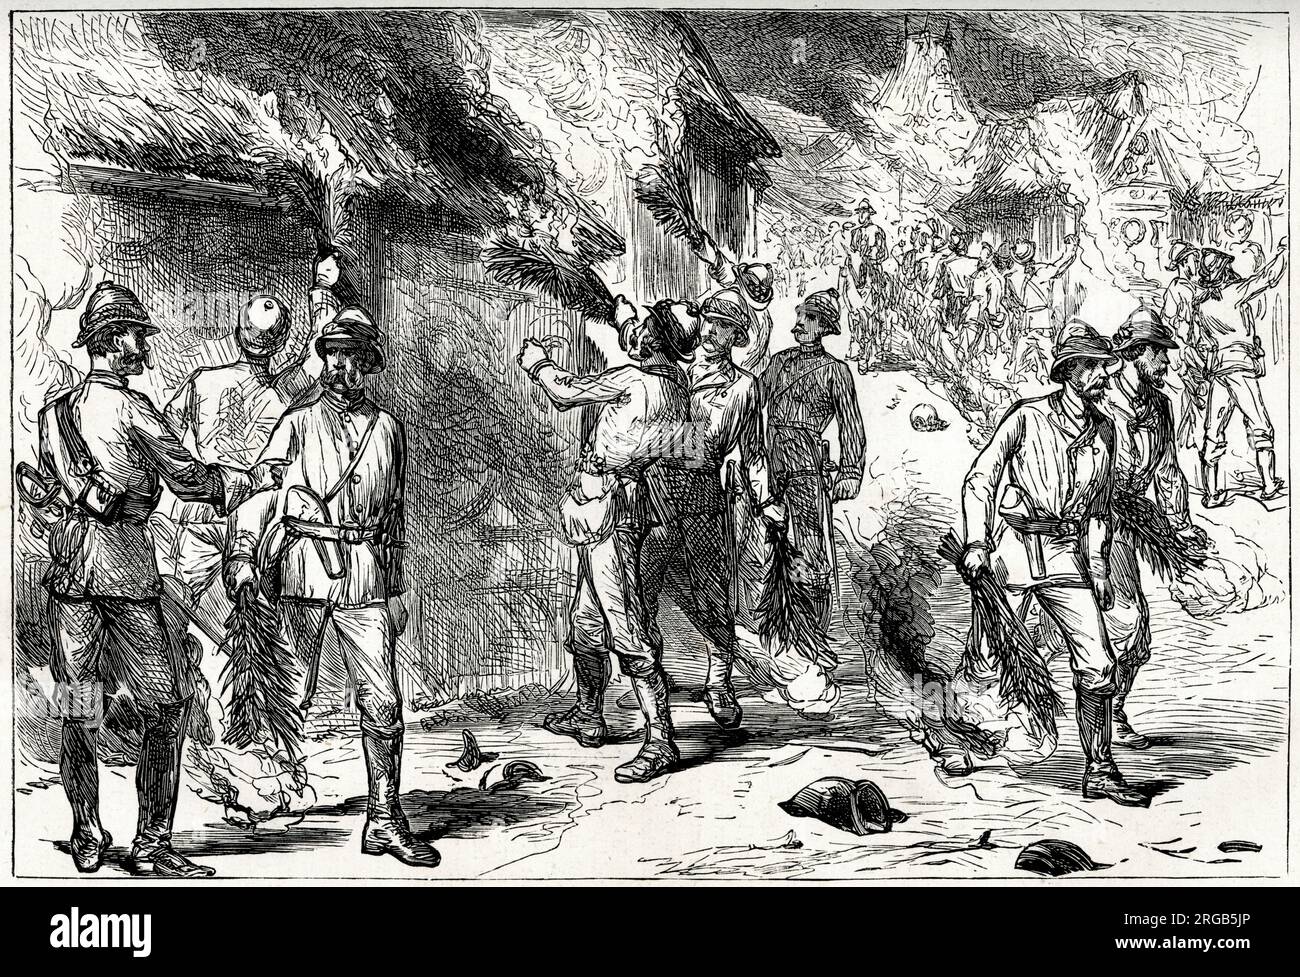 Burning of Kumasi, February 1874, Third Anglo-Ashanti War or First Ashanti Expedition (1873-1874, to rescue European missionary captives held in Kumasi), West Africa (Ghana). Stock Photo